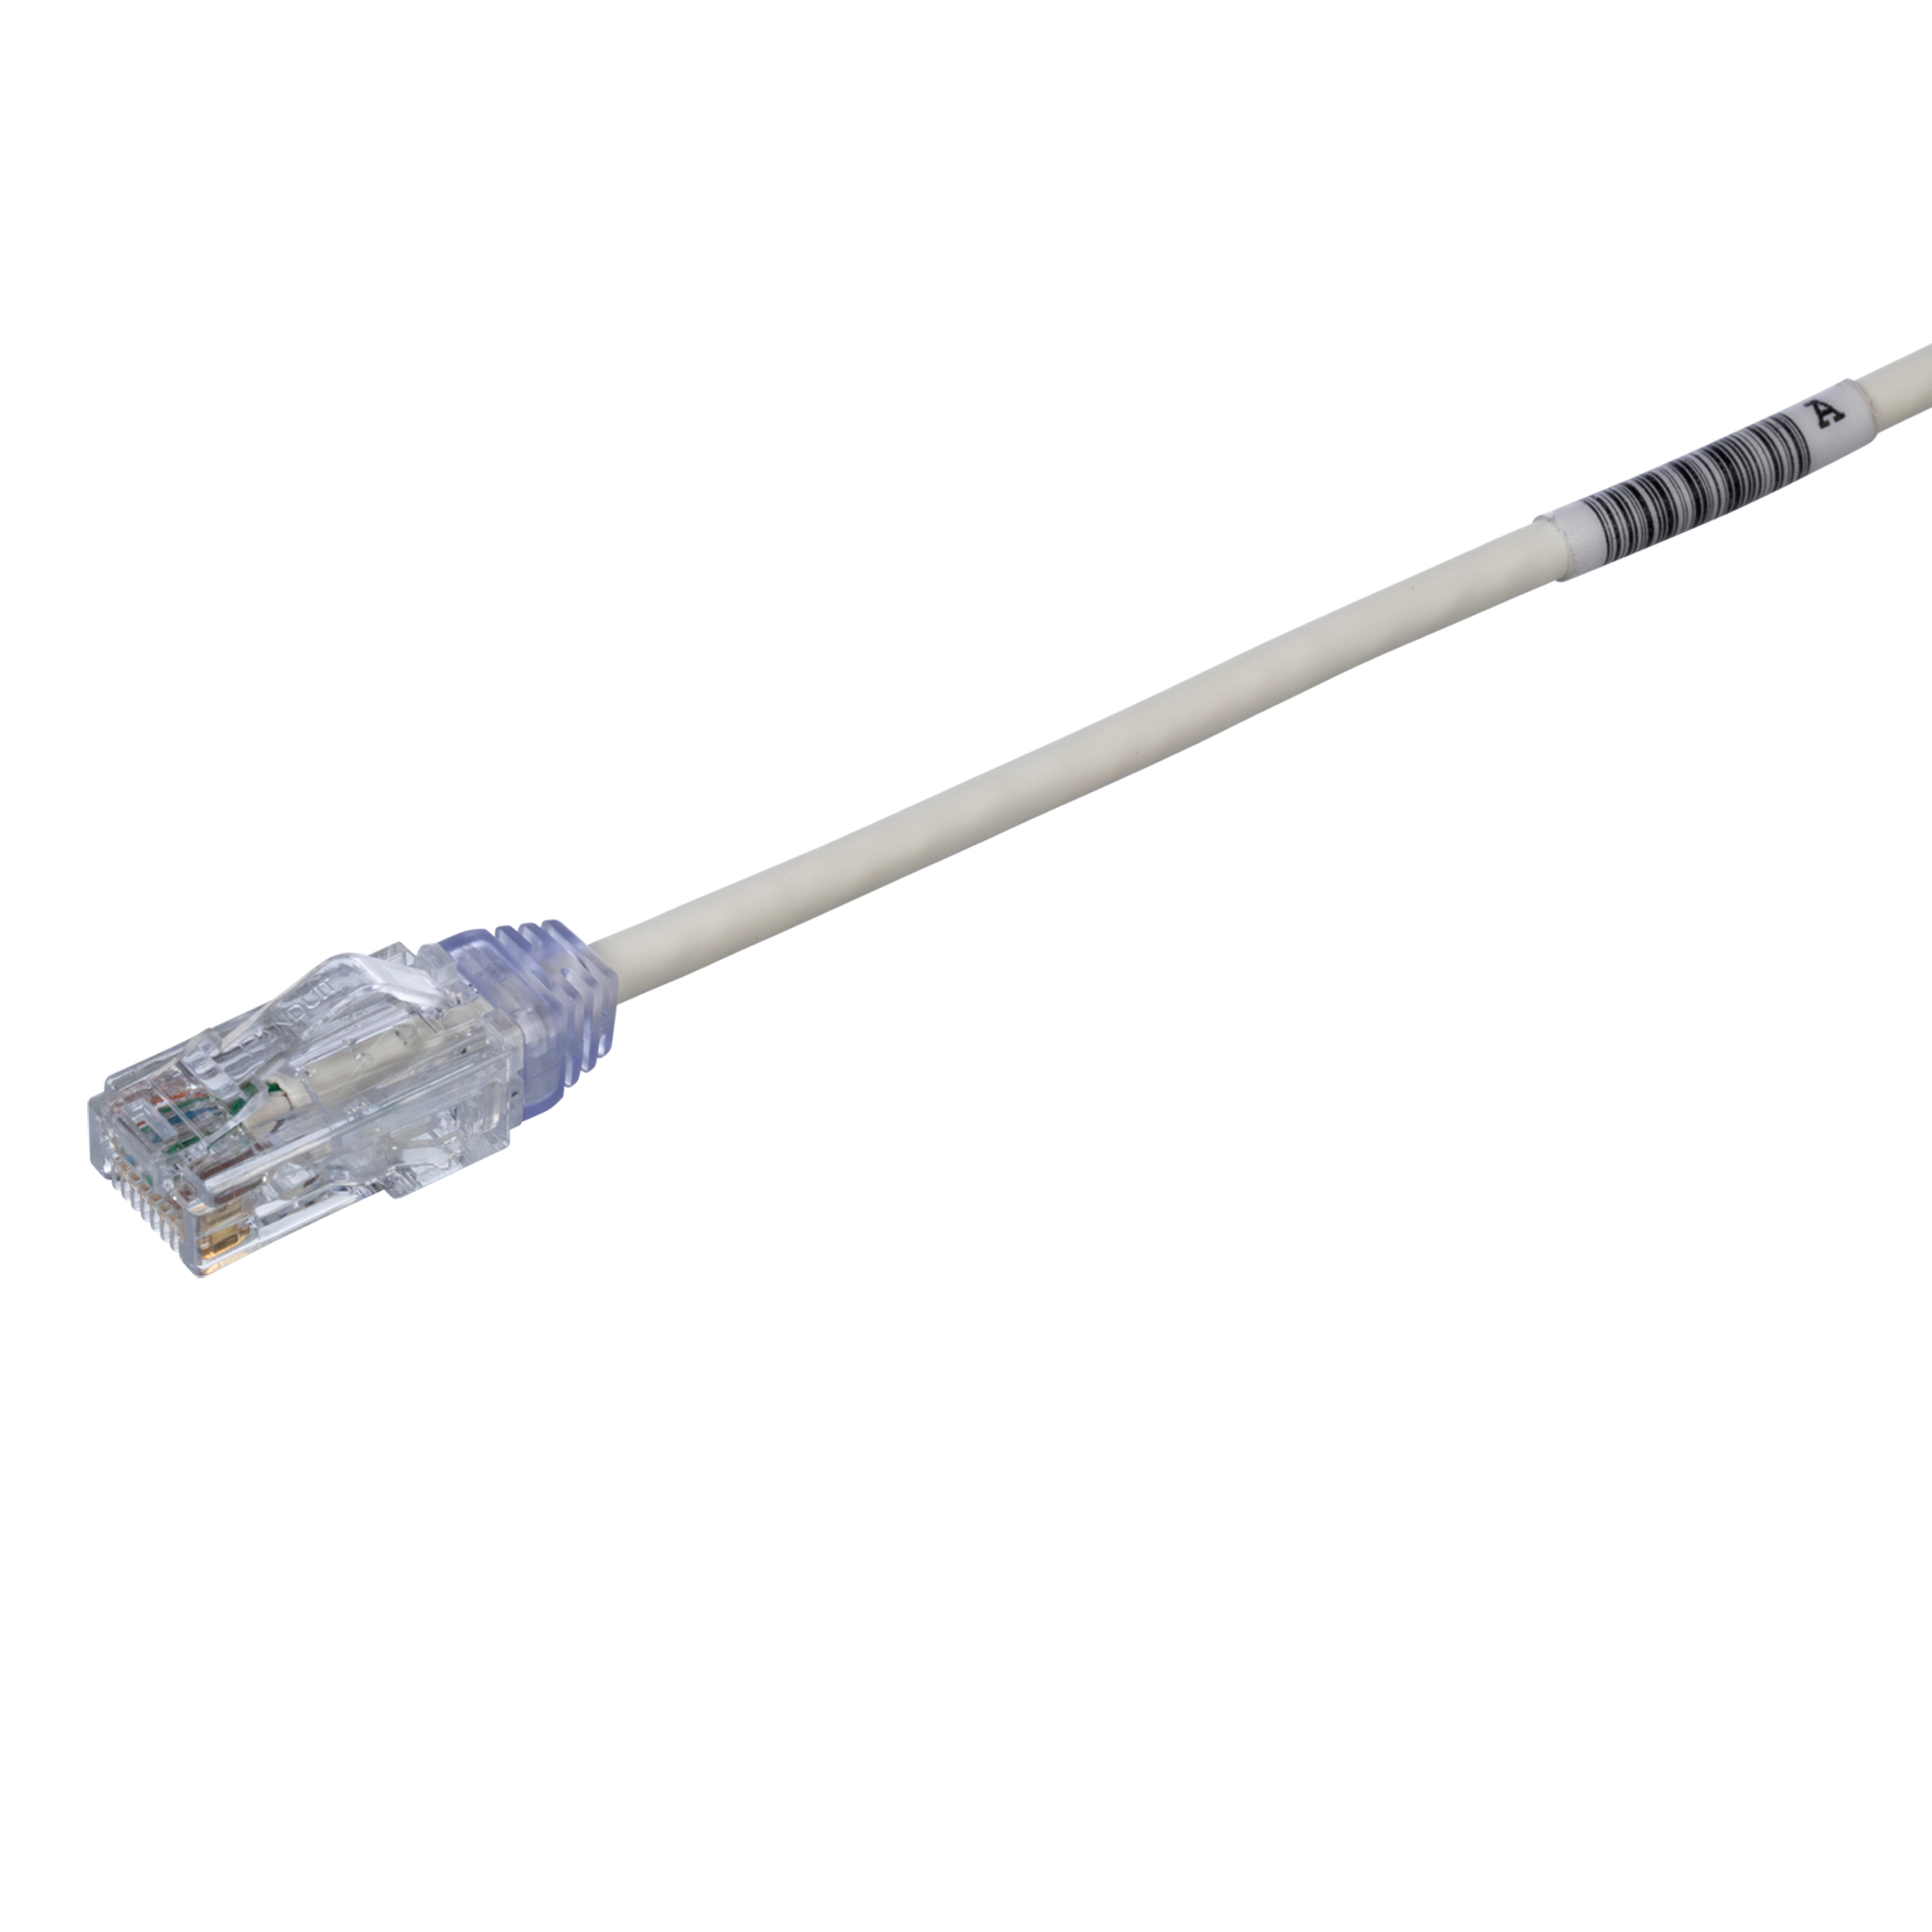 Cat 6 28 AWG UTP Copper Patch Cord, 20 ft, White